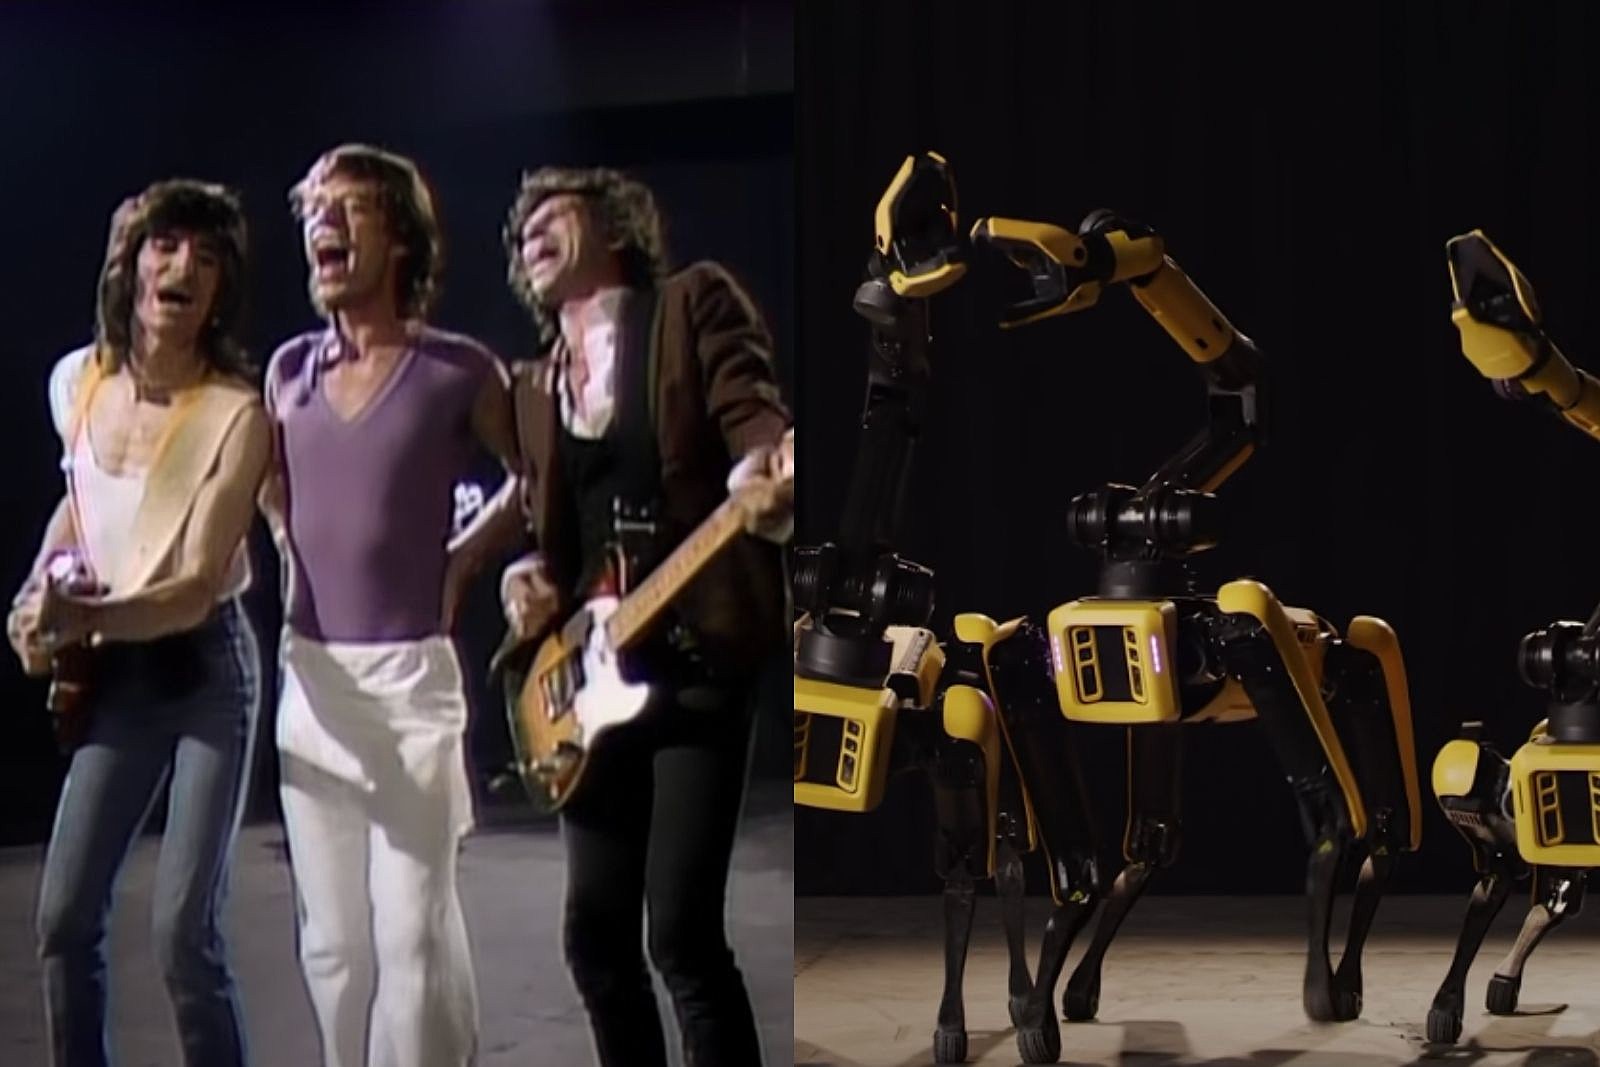 Boston Dynamics robots dance with Mick Jagger in a replay of The Rolling Stones' 40-year-old music video